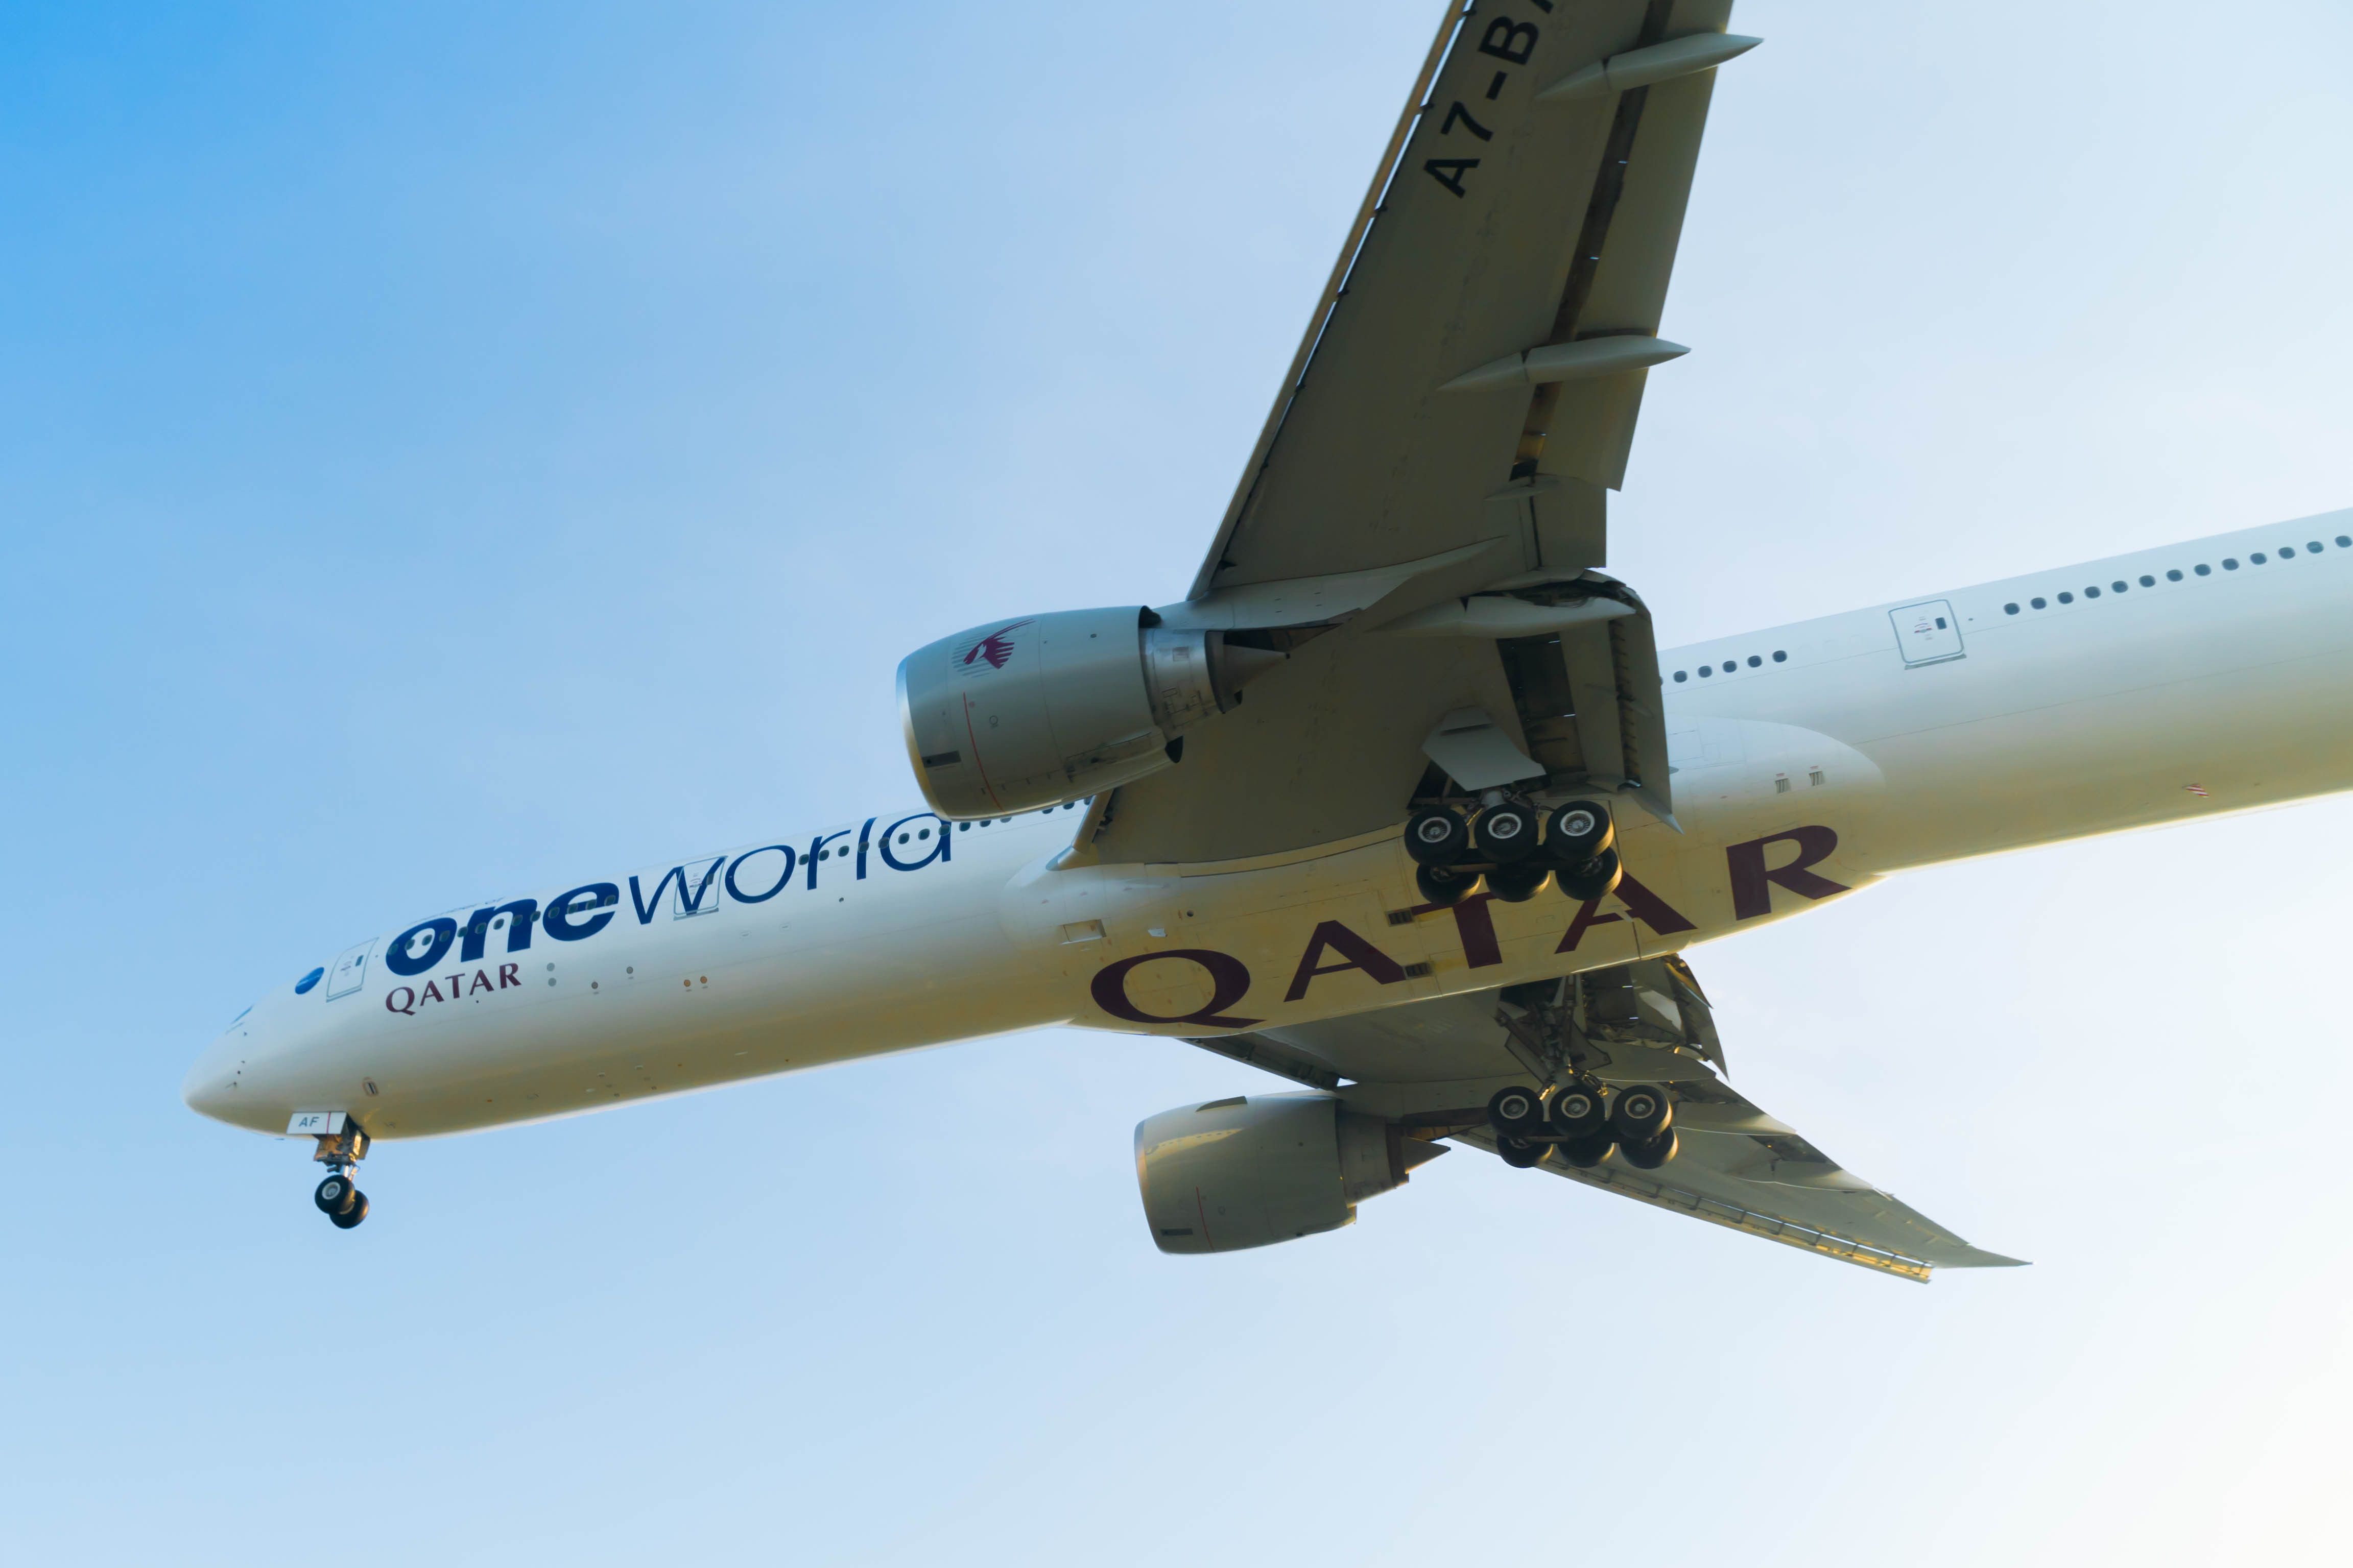 Qatar A330 in oneworld livery approaches therunway for a landing